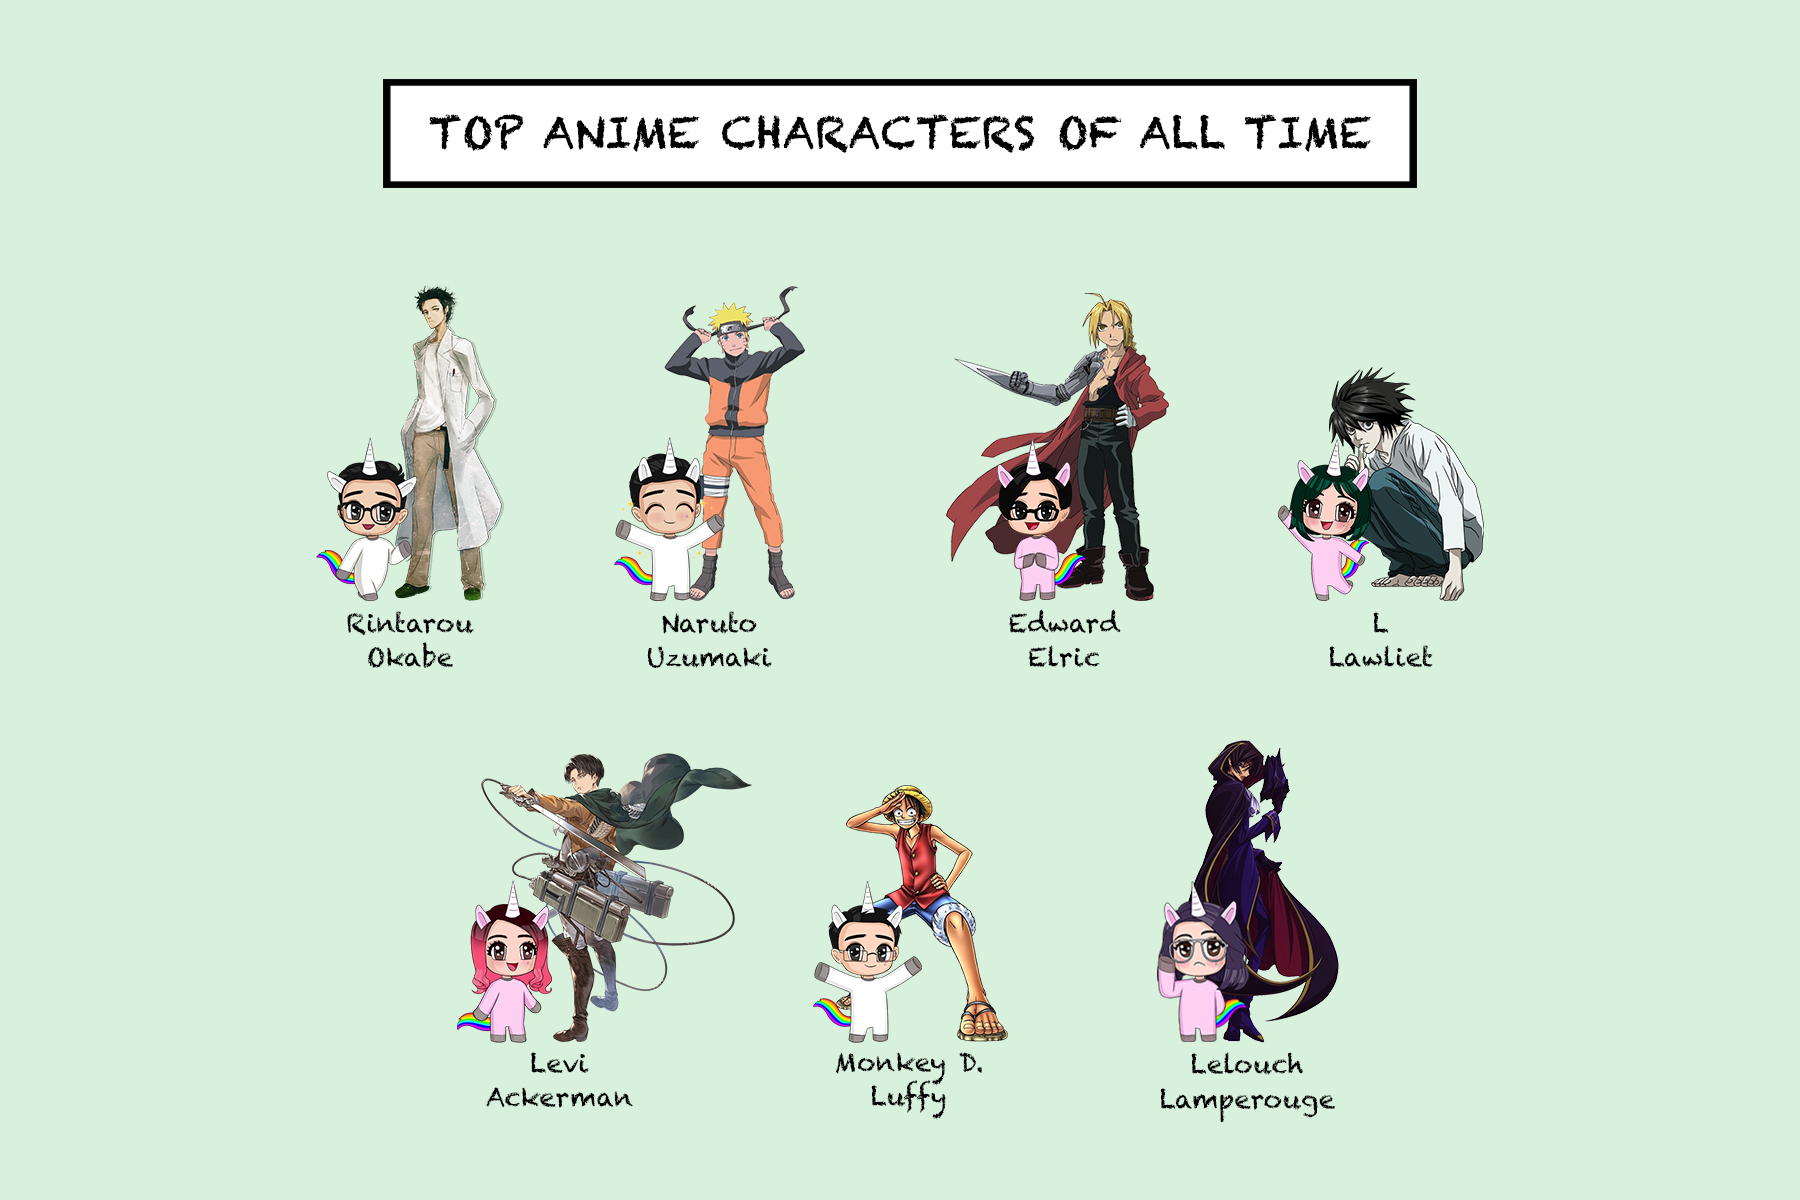 The 30 Most Powerful Anime Characters of All Time Ranked